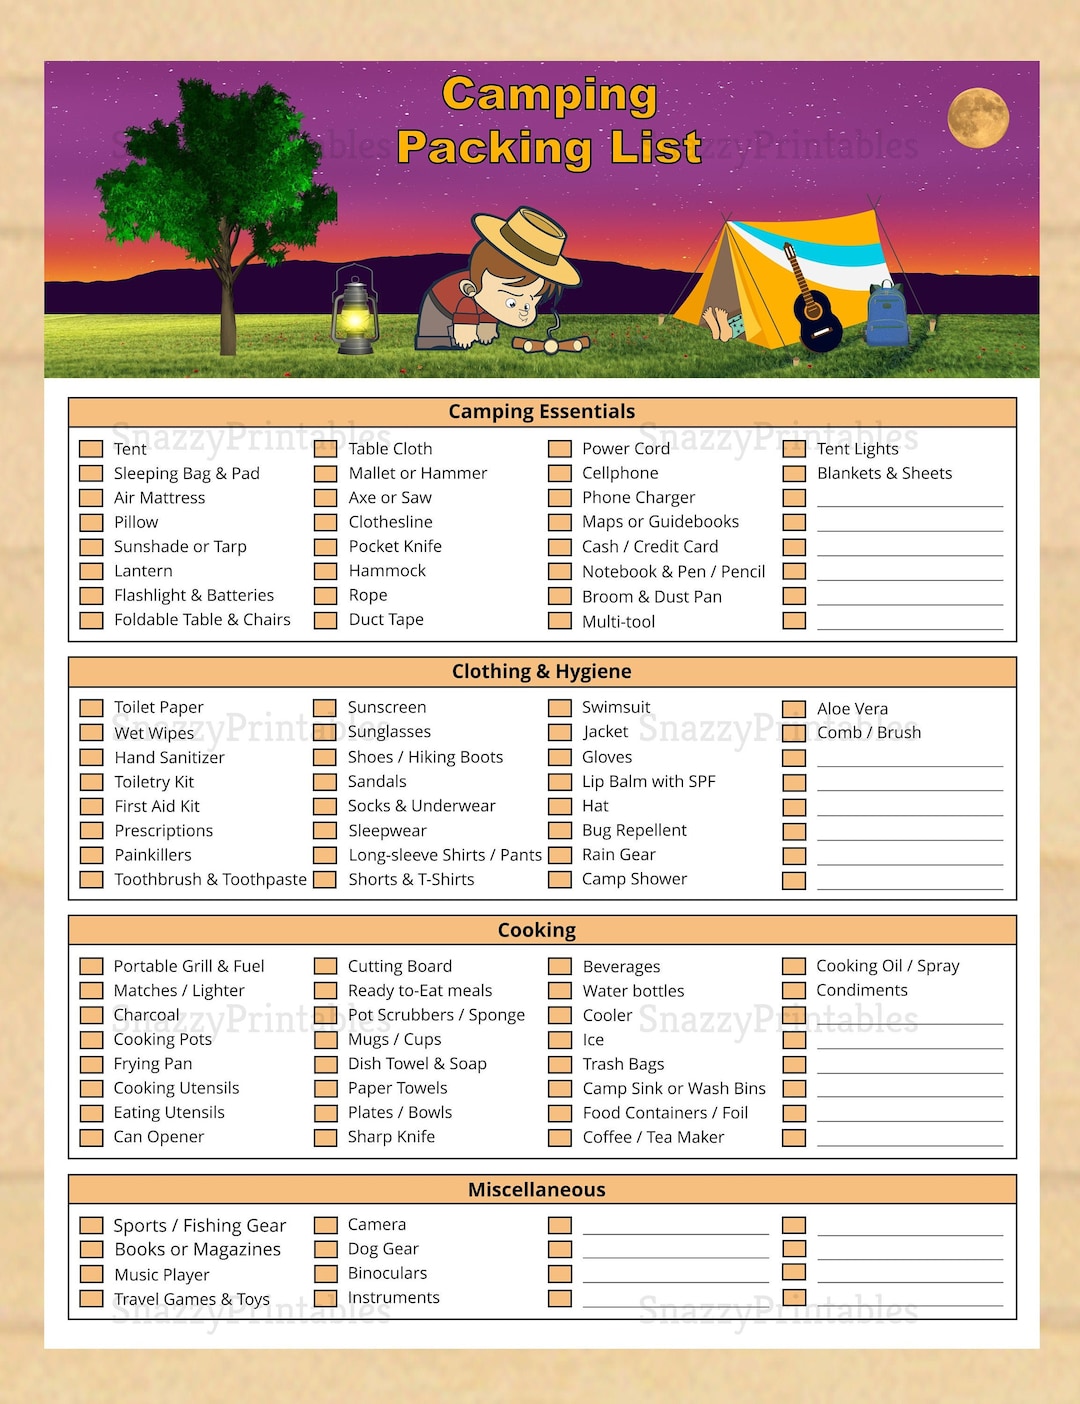 Featured products Camping Checklist – Love The Outdoors, camping